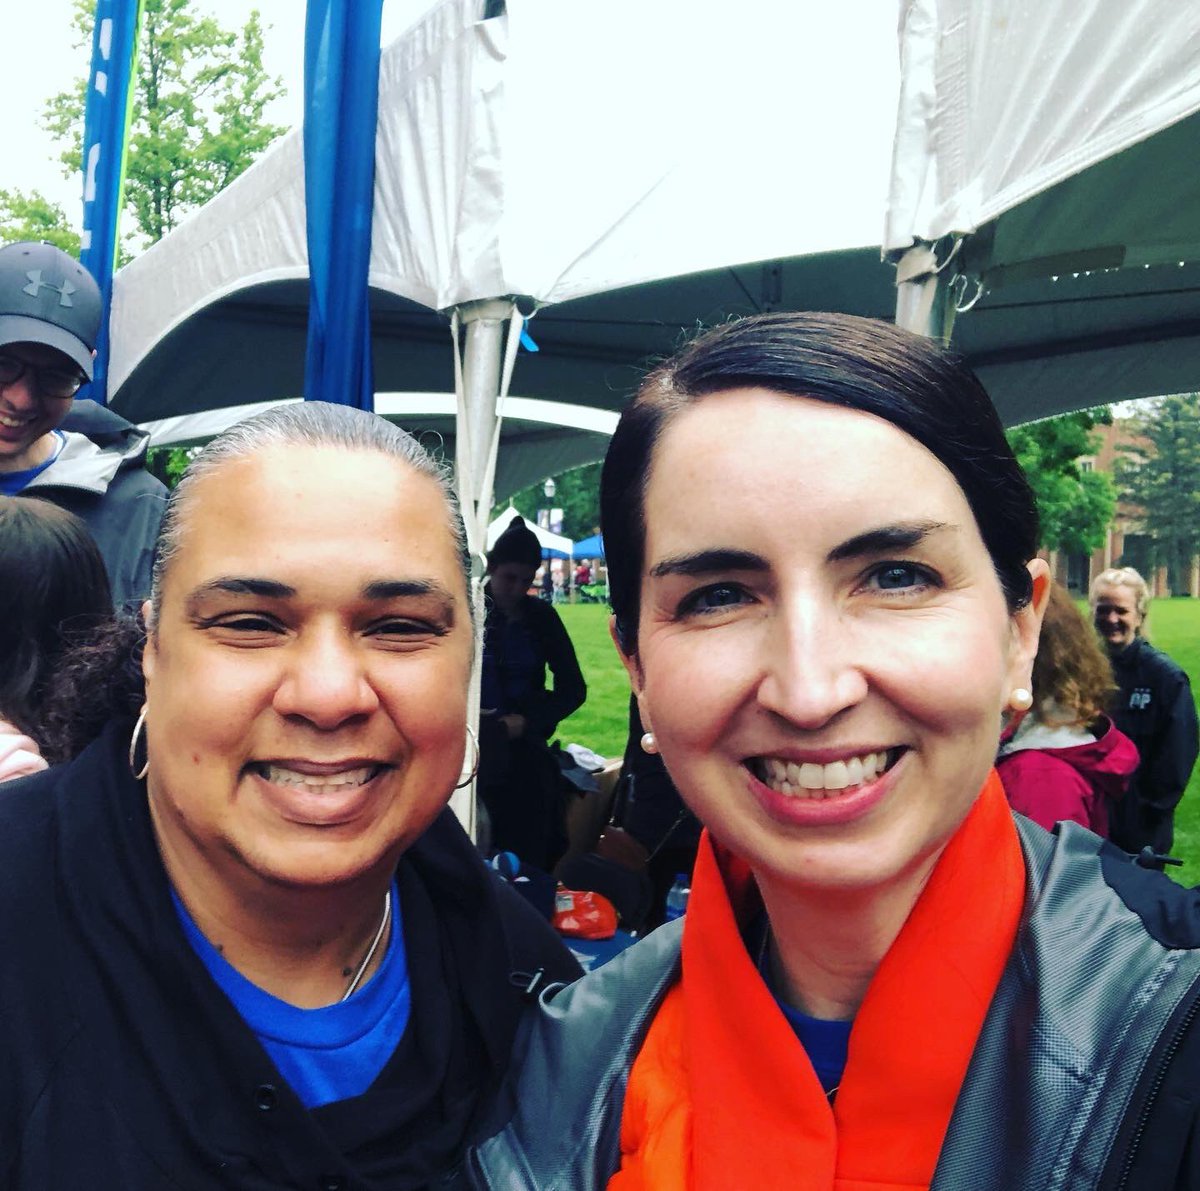 Great day for #WalkMS Columbus, Ohio! @OhioHealth @mssociety #MultipleSclerosis